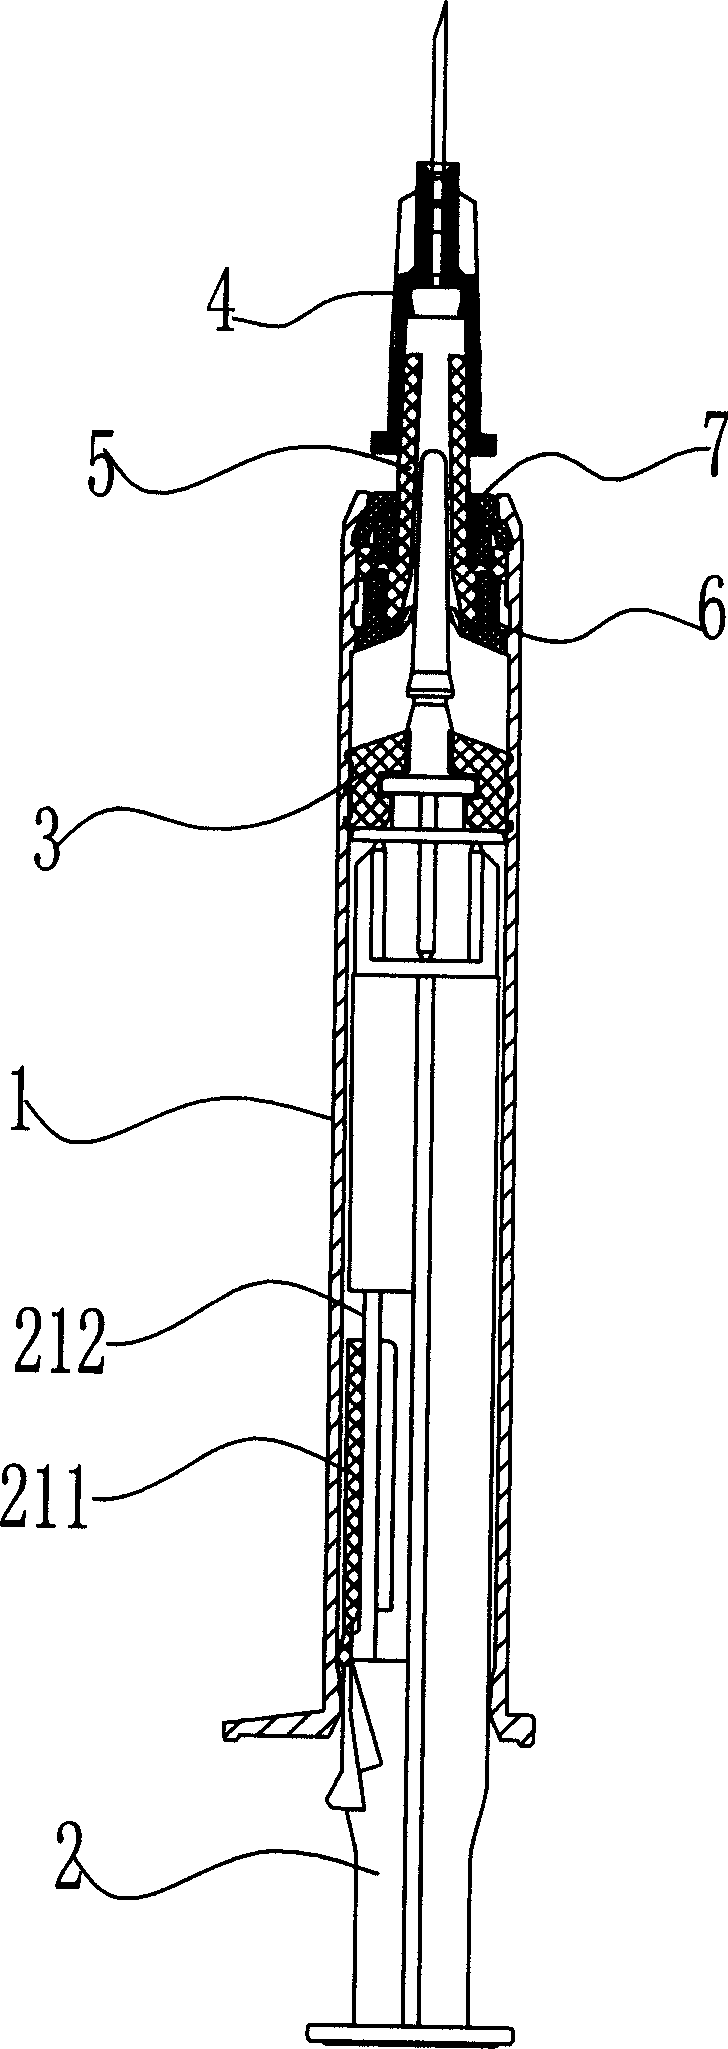 Needle retraction type safety injector